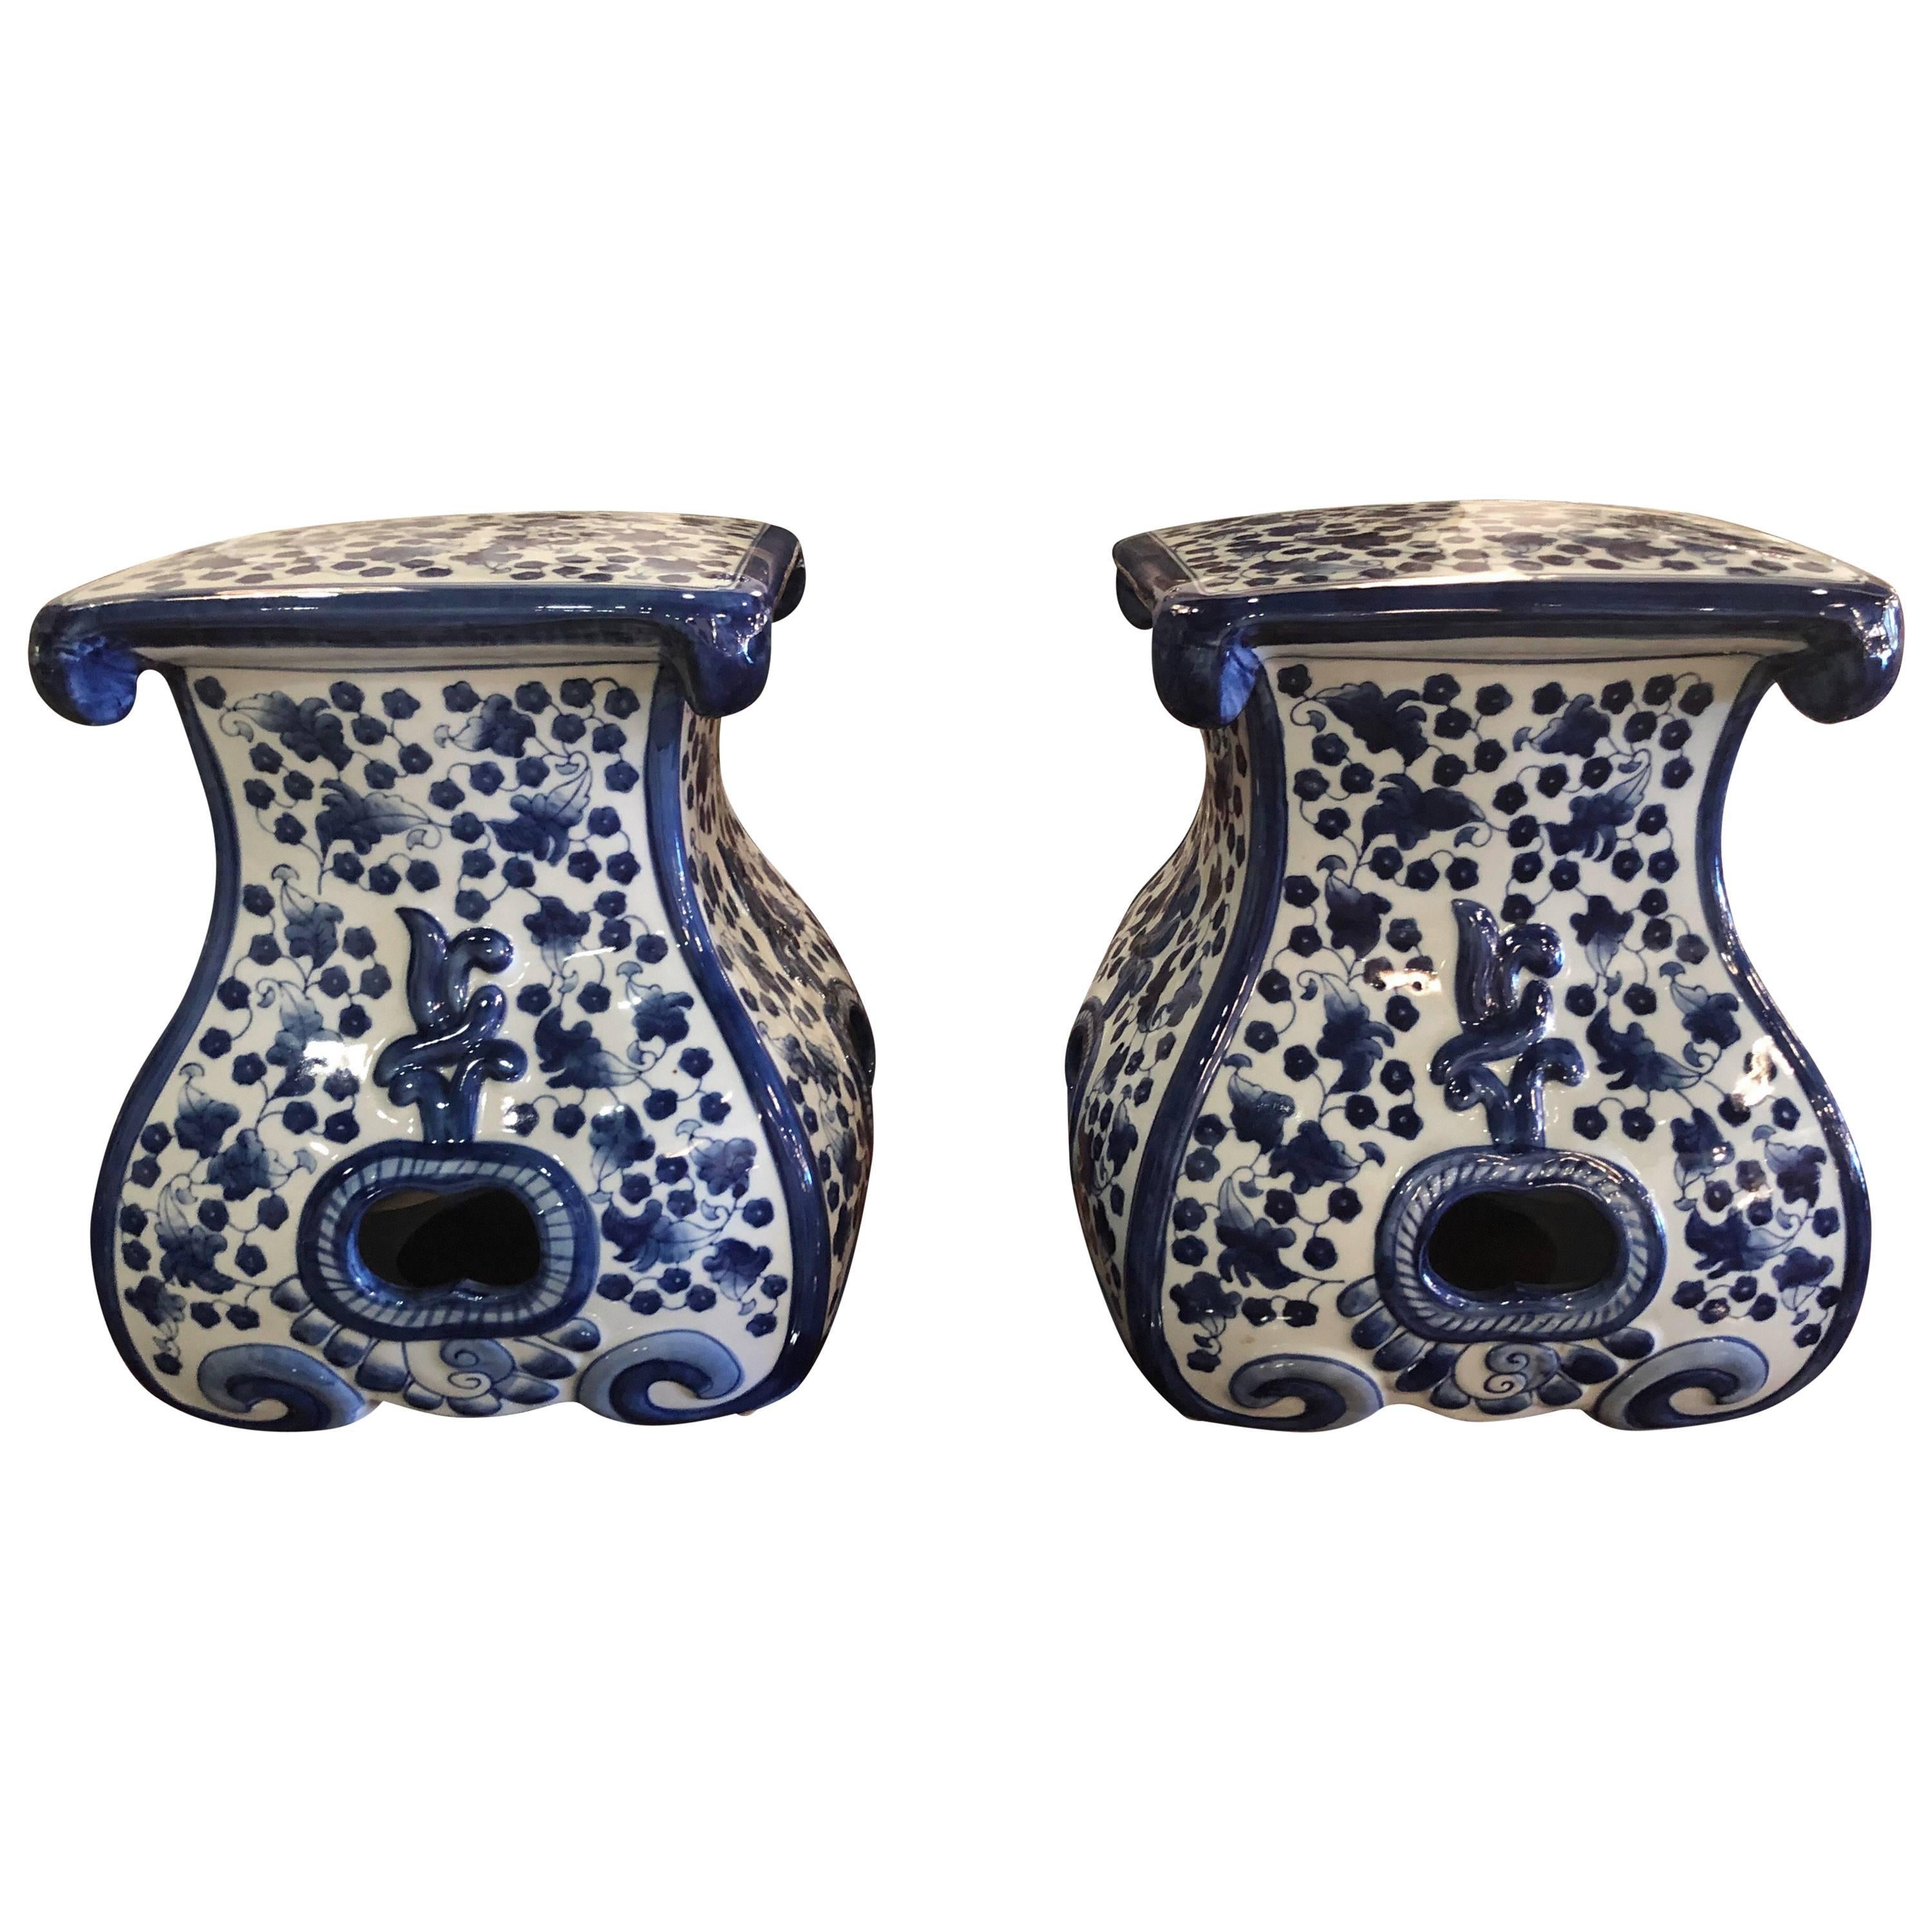 Pair of Blue and White Ceramic Garden Stools Benches Stands